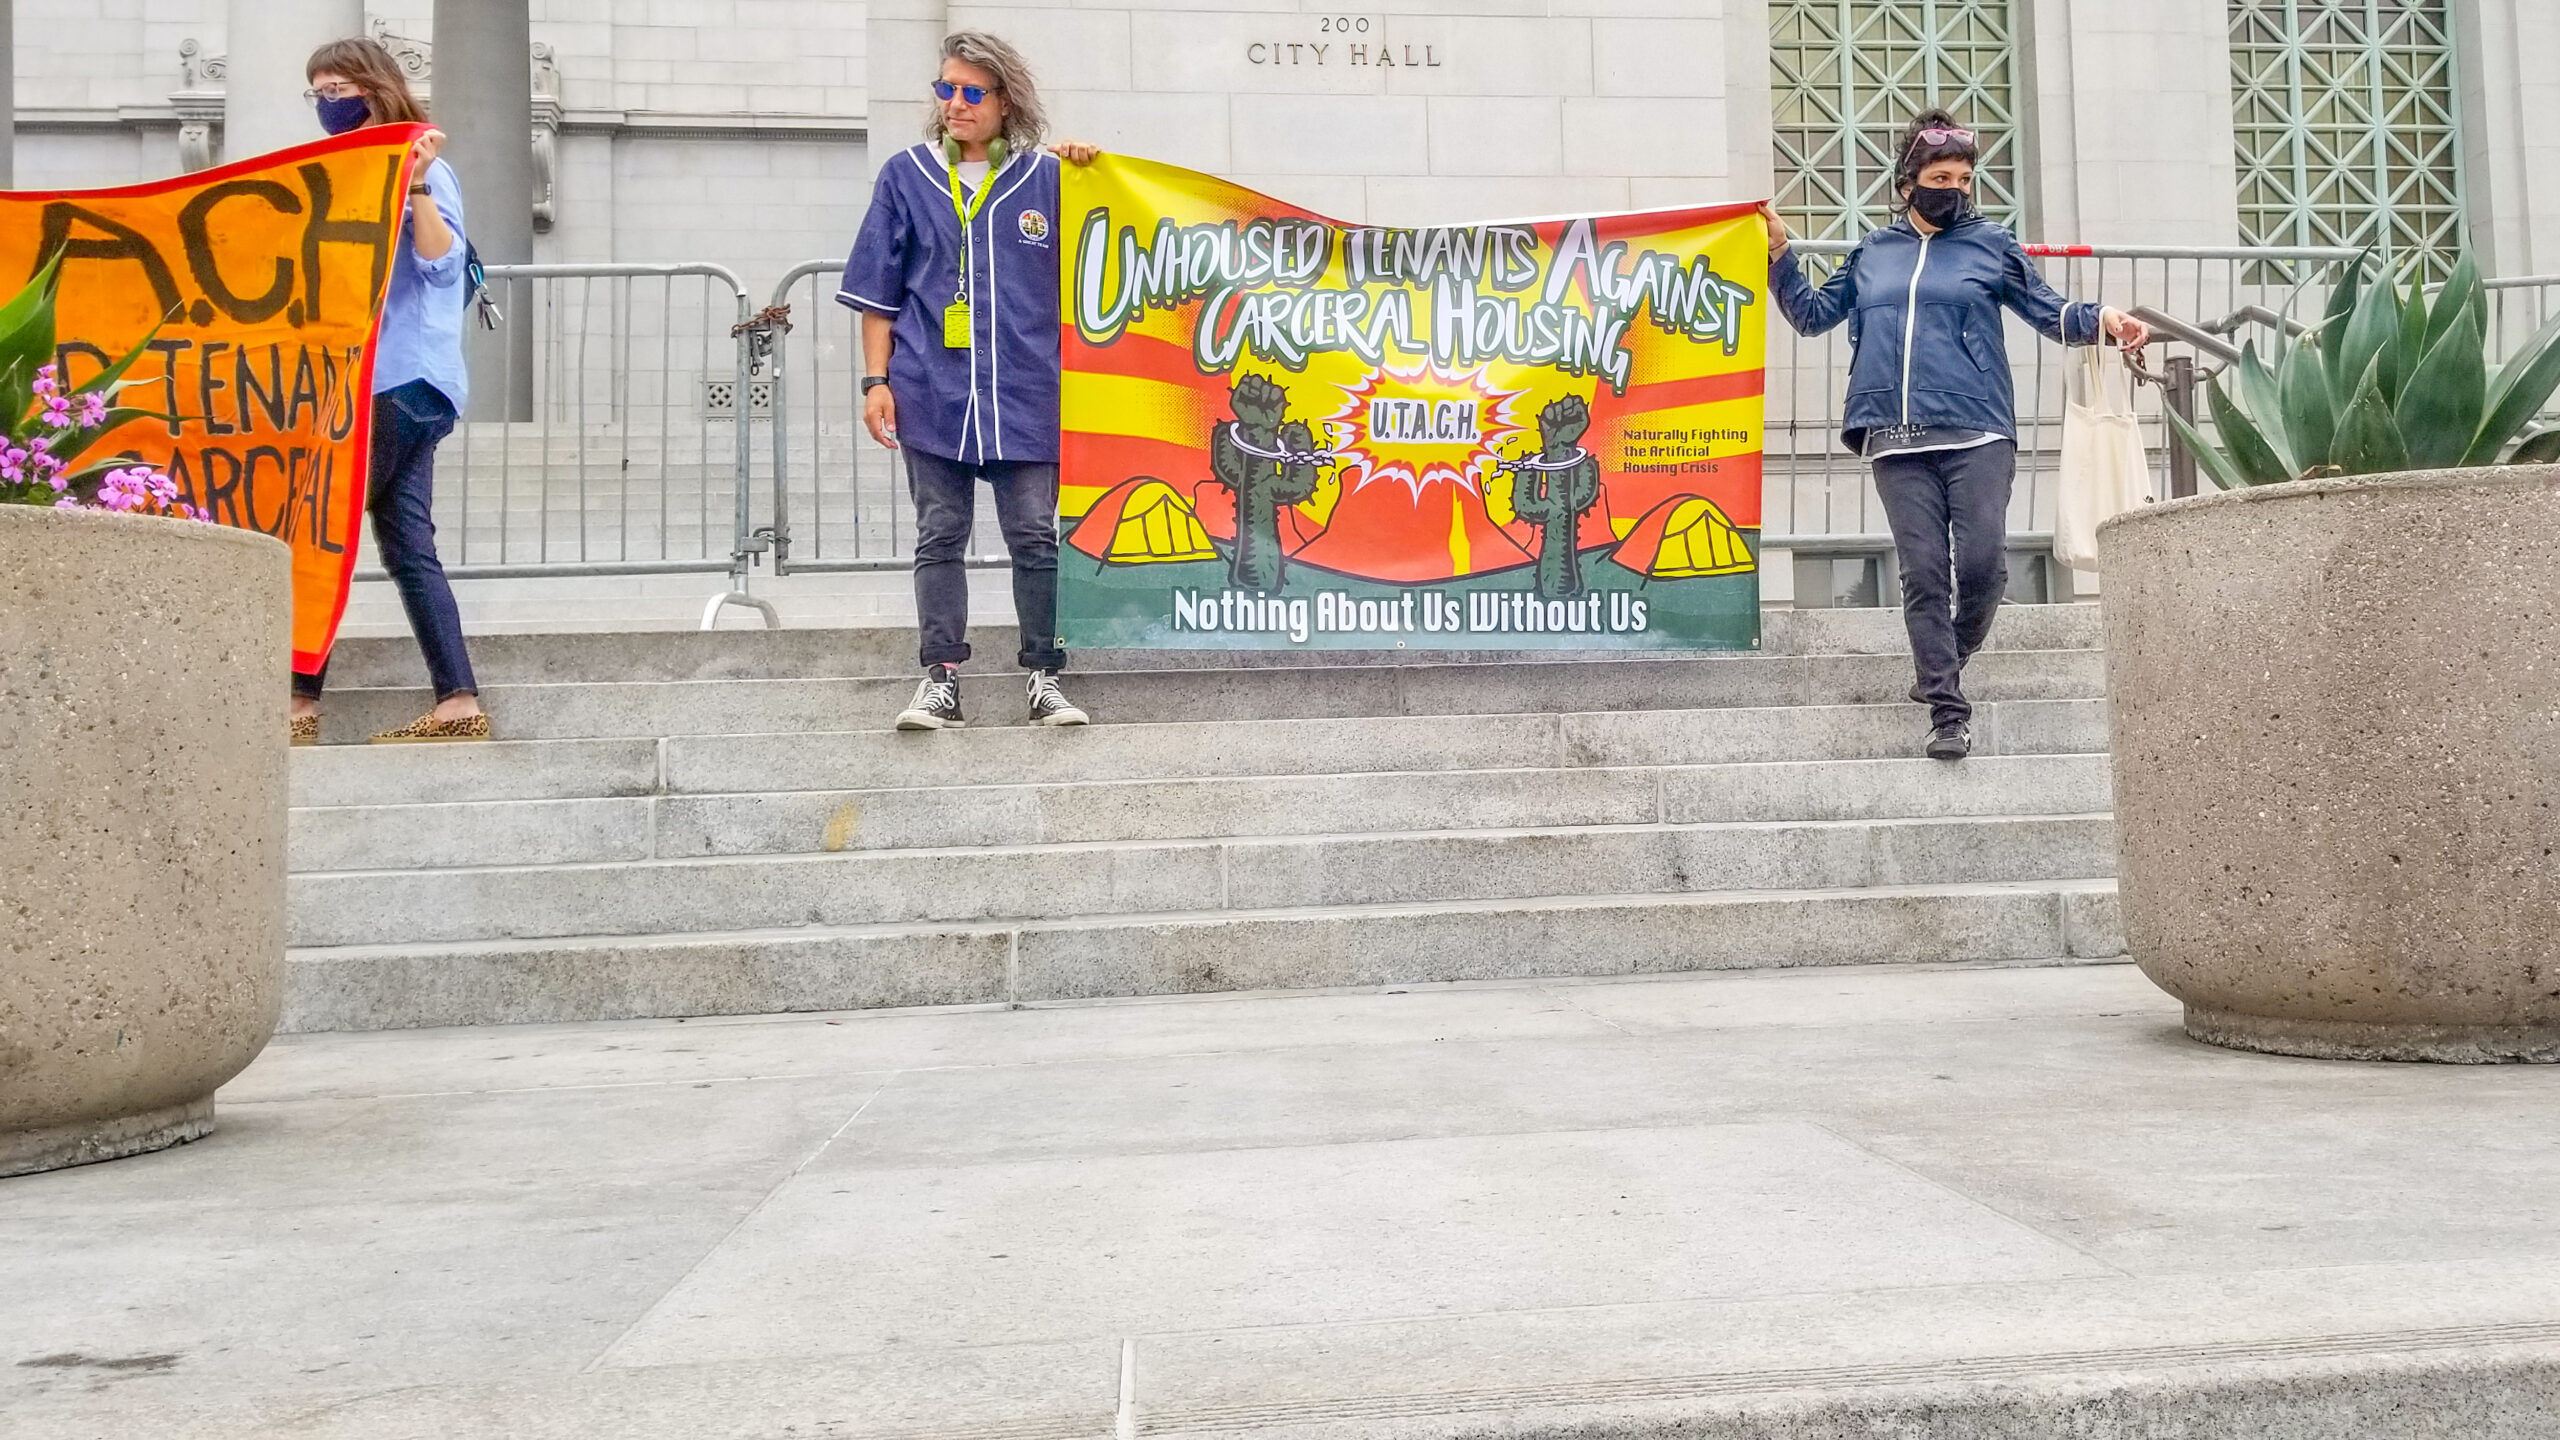 Two organizers hold up a UTACH banner in front of Los Angeles City Hall on May 19, 2021.